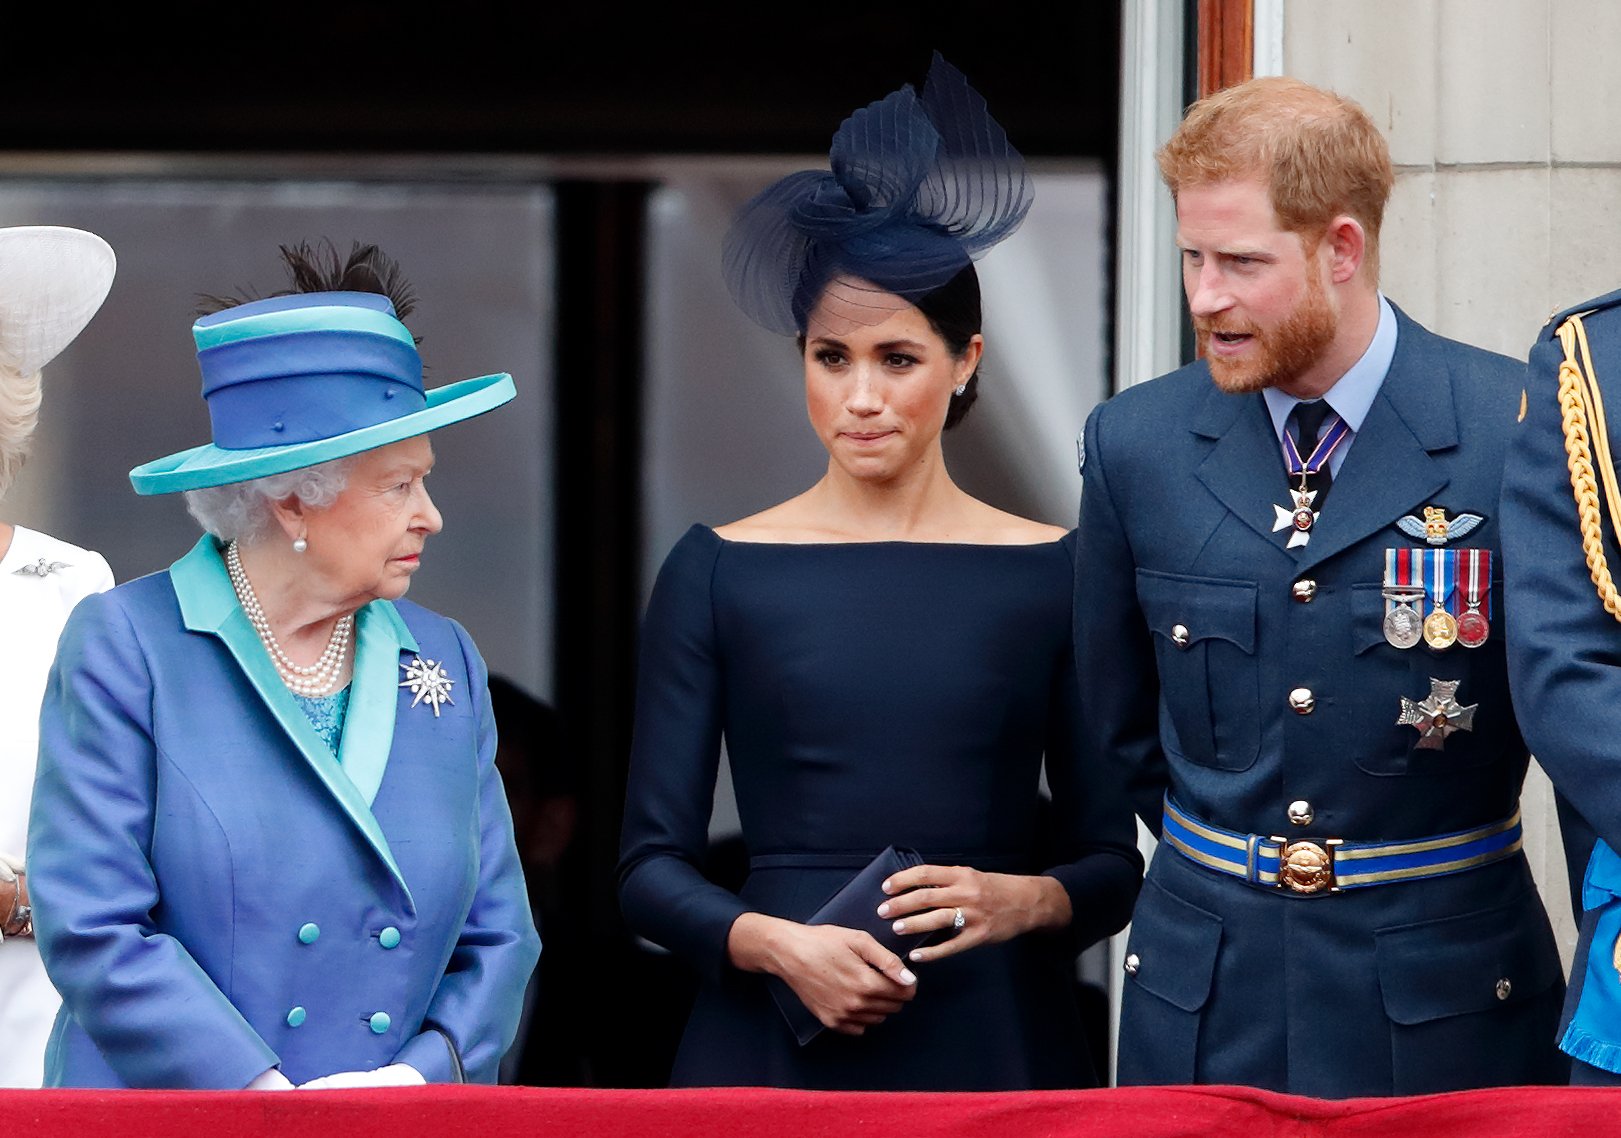 Queen Elizabeth II, Duchess Meghan, and Prince Harry watch a flypast to mark the centenary of the Royal Air Force from the balcony of Buckingham Palace on July 10, 2018, in London, England. | Source: Getty Images